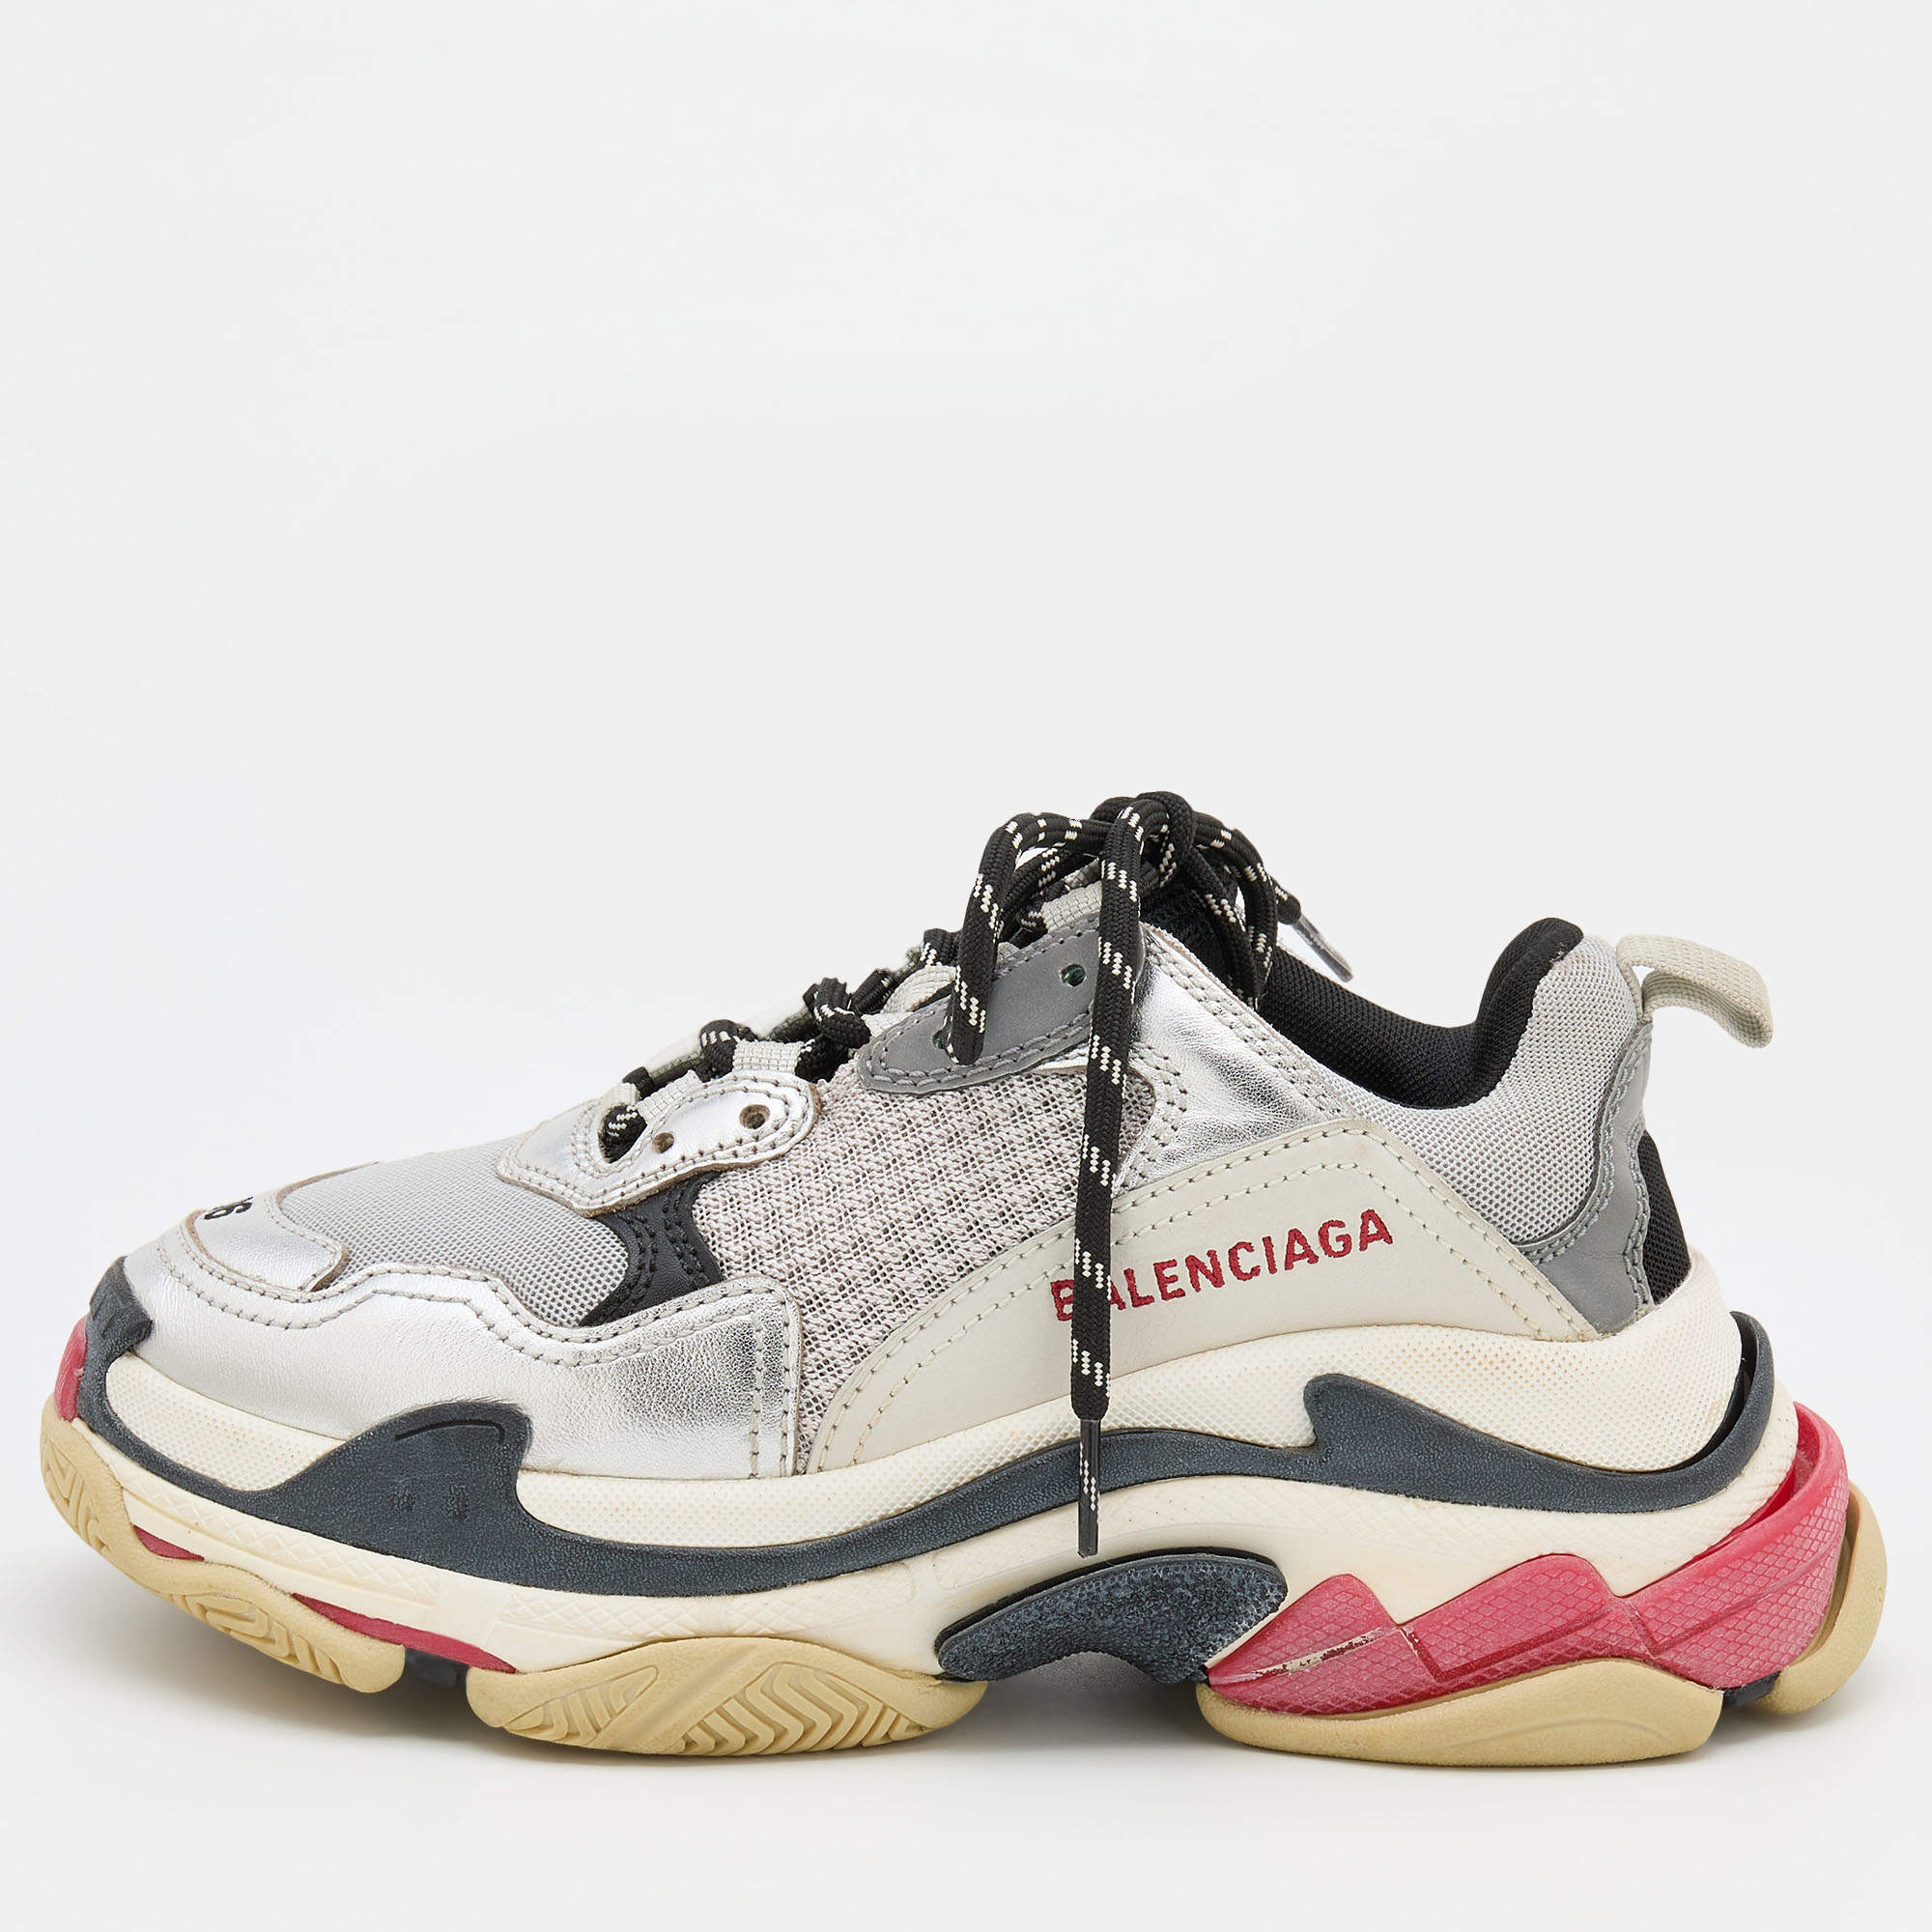 Balenciaga Multicolor Leather and Mesh Triple S Sneakers Size 36